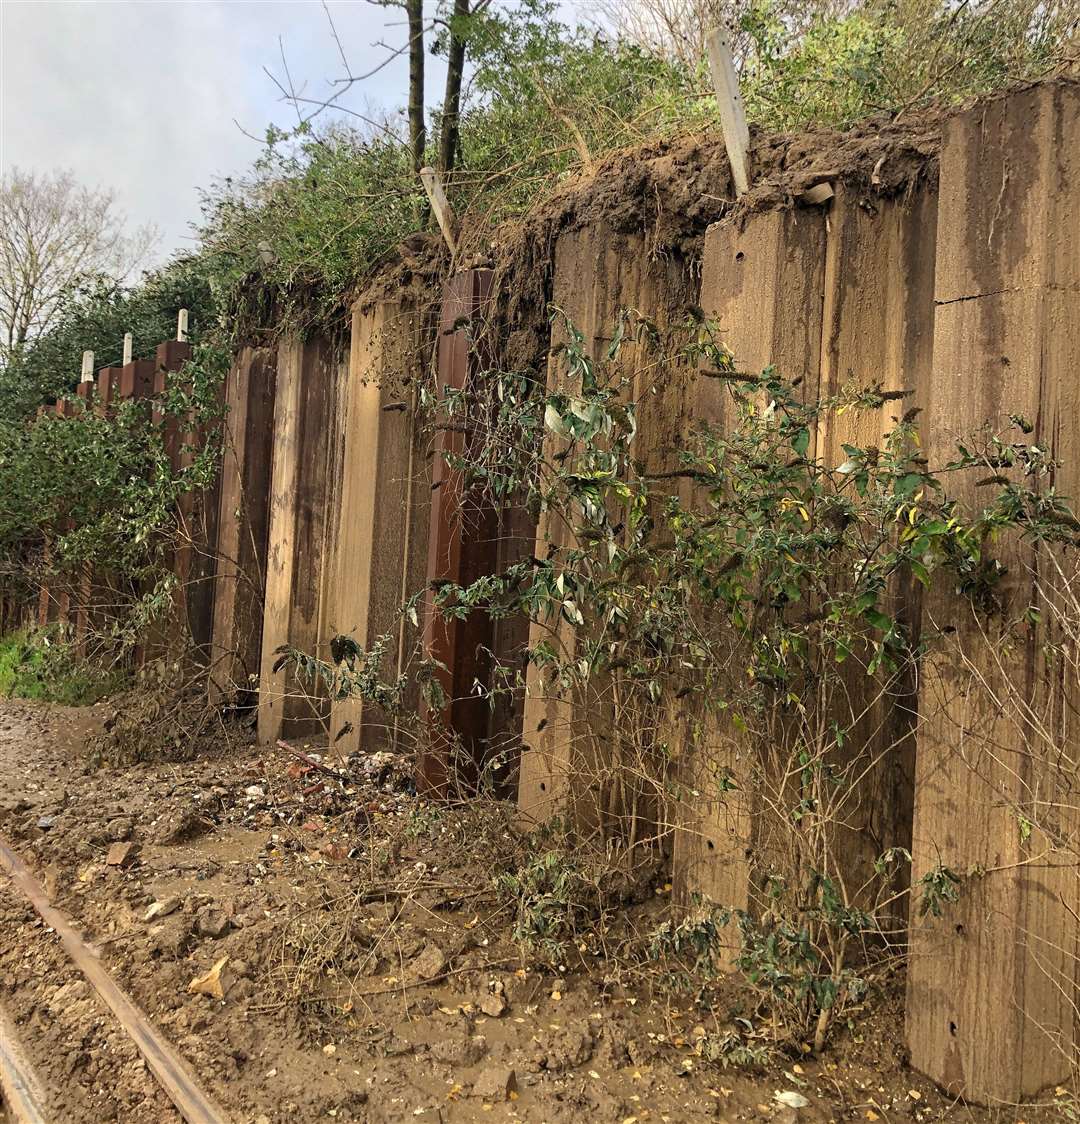 Engineers are currently at Cuxton inspecting the damage. Picture: @NetworkRailSE